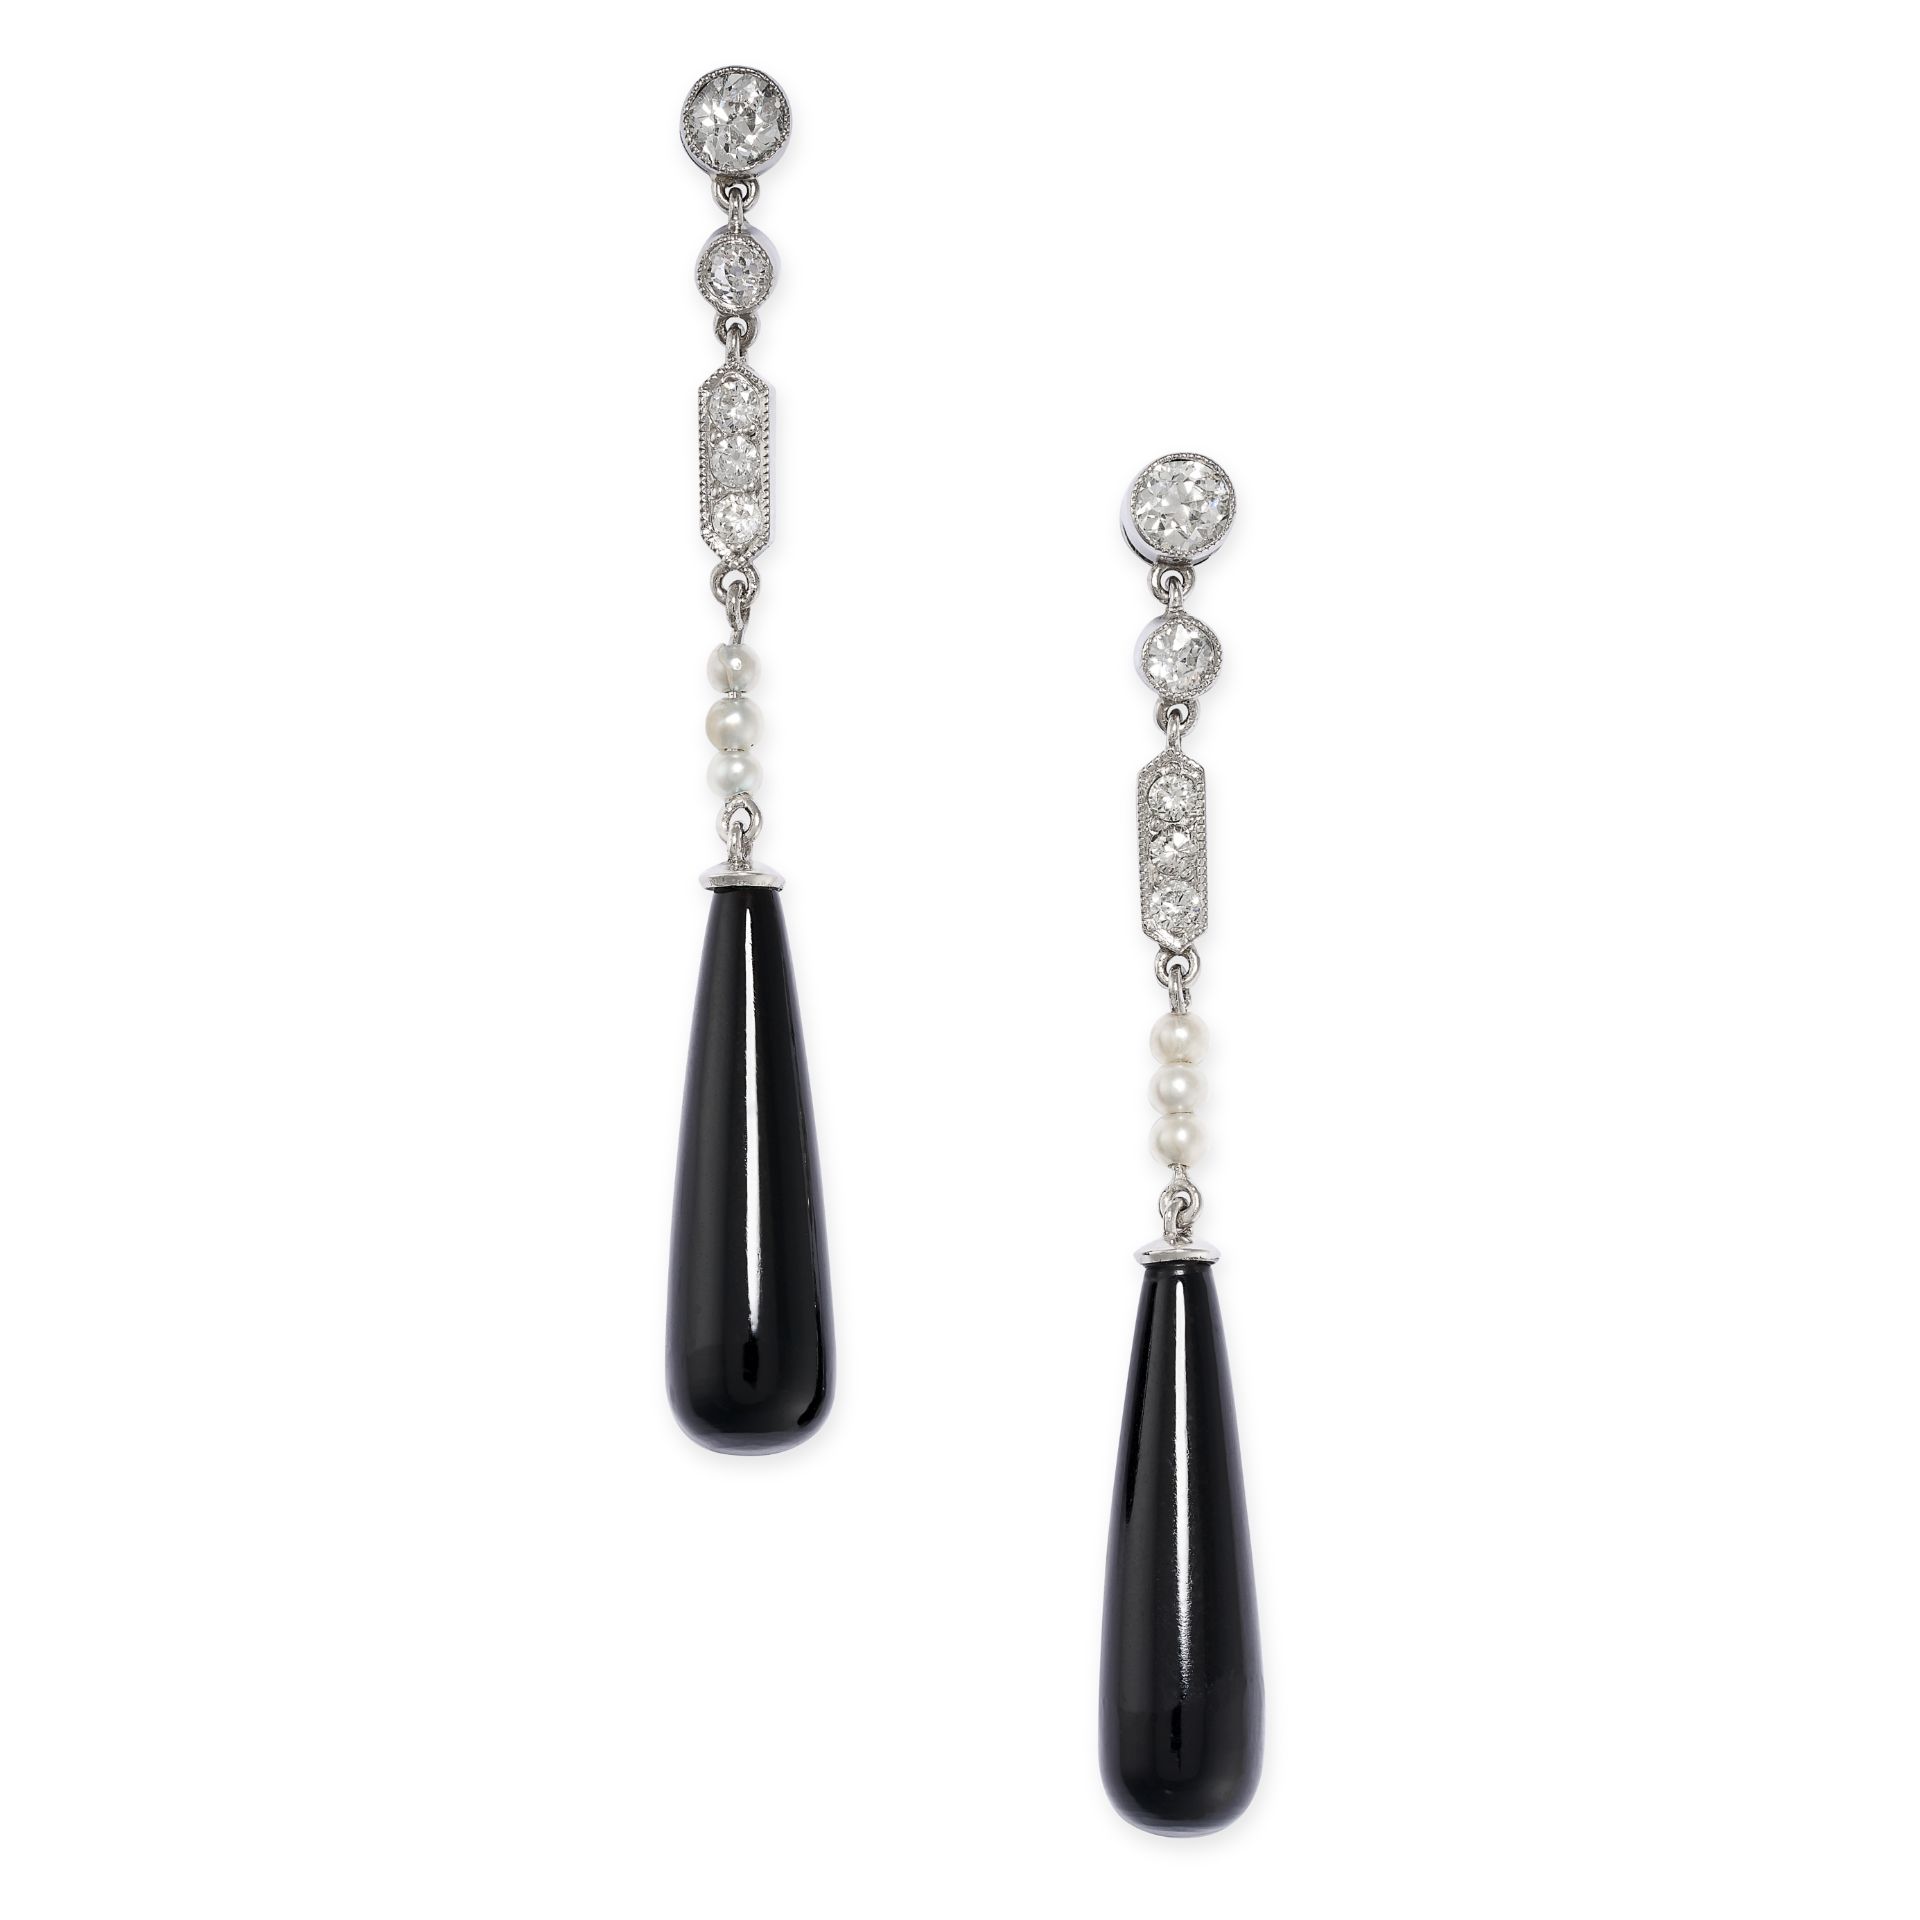 A PAIR OF ONYX, PEARL AND DIAMOND EARRINGS in platinum, each set with a polished onyx drop